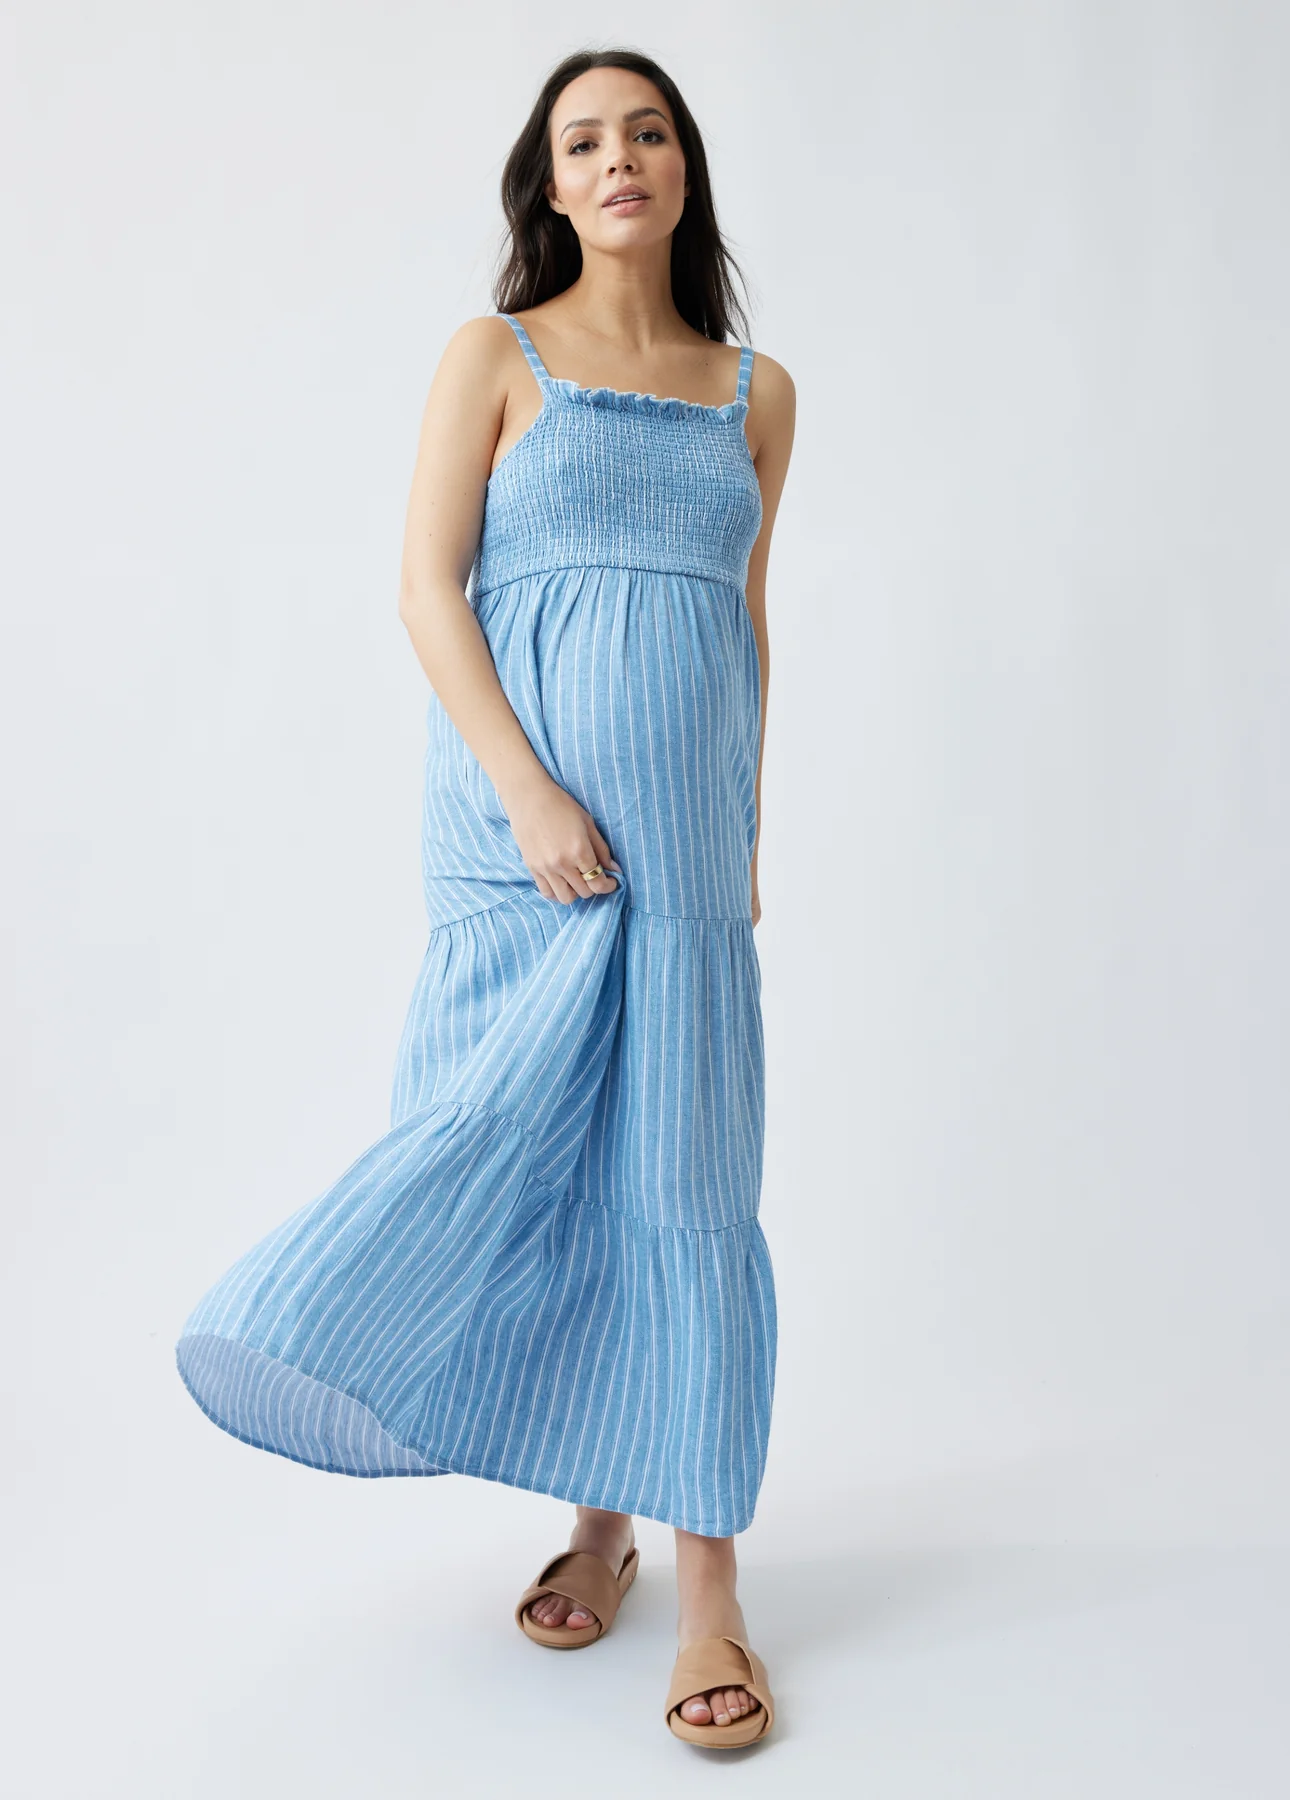 INGRID+ISABEL SMOCKED MATERNITY MAXI DRESS in blue and white striped